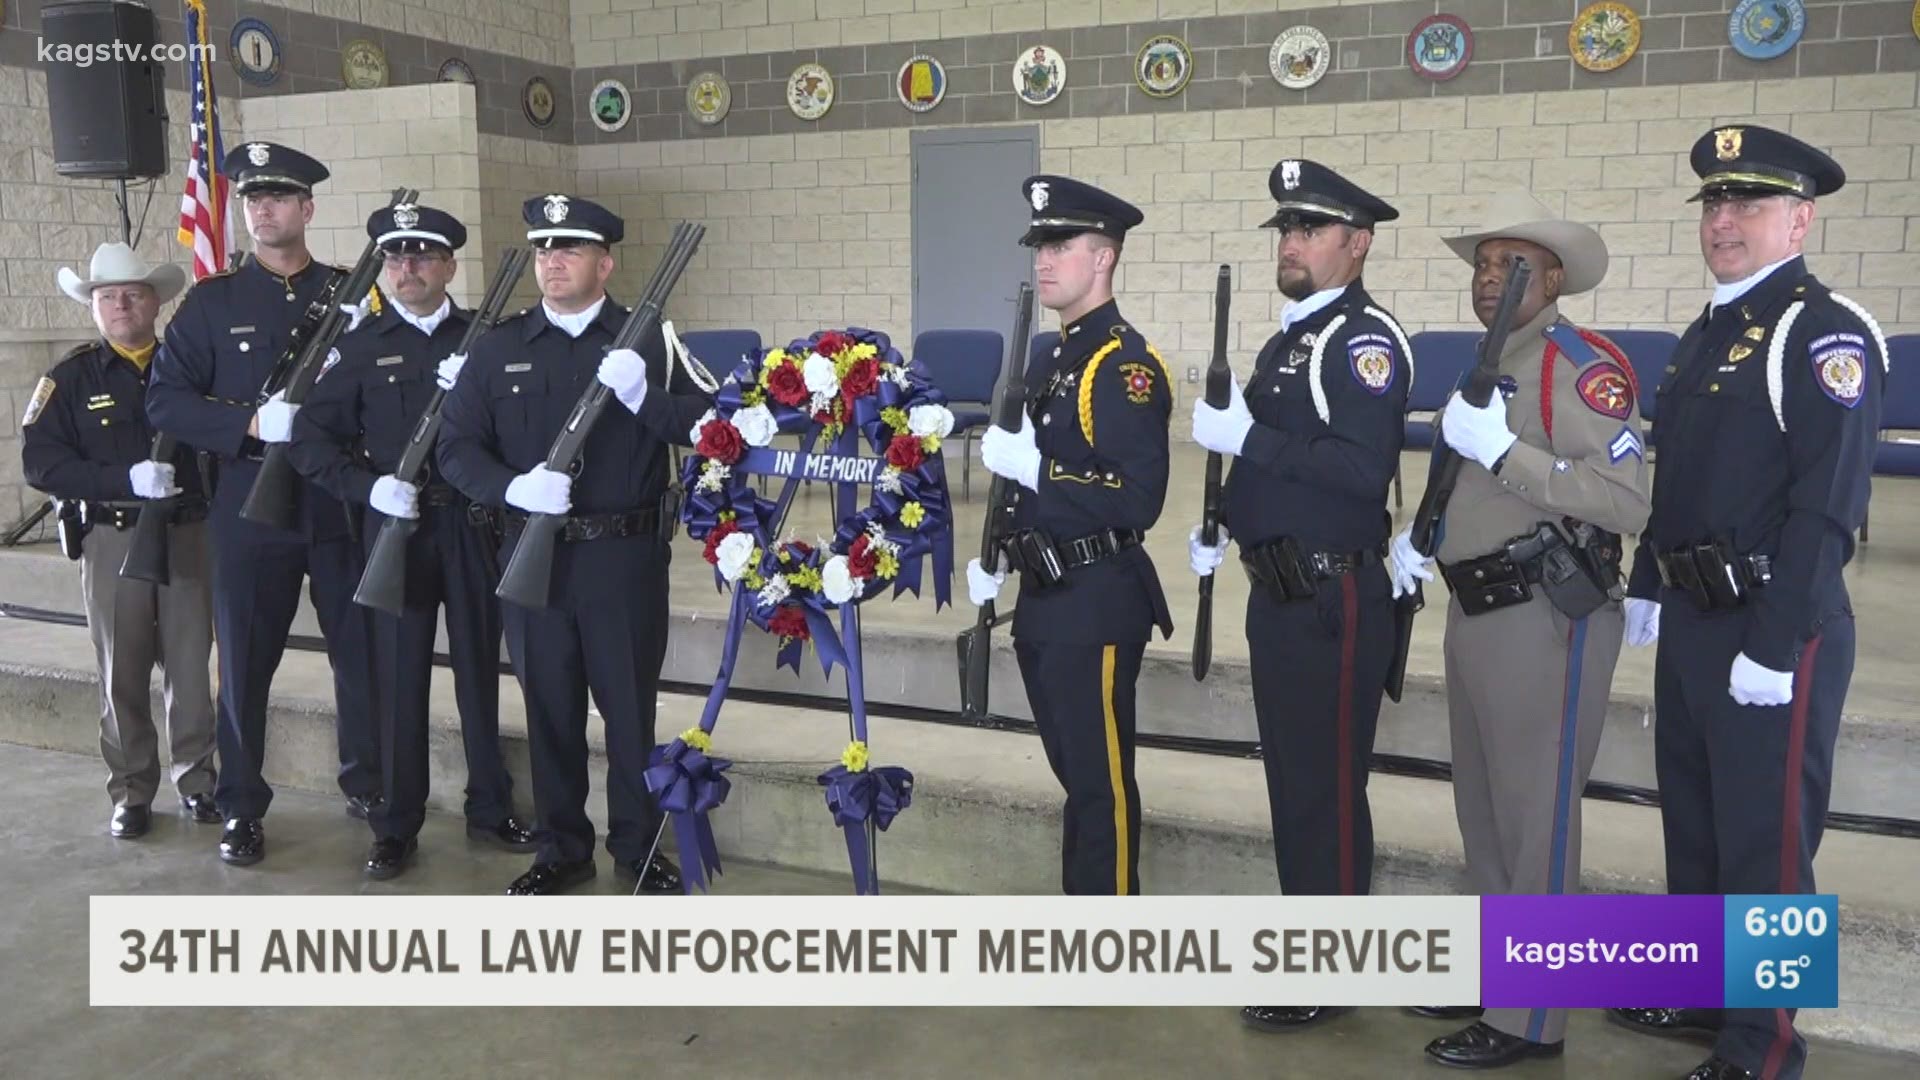 The service was held in Veteran's Memorial Park and honored the lives of Texas officers lost in the line of duty.